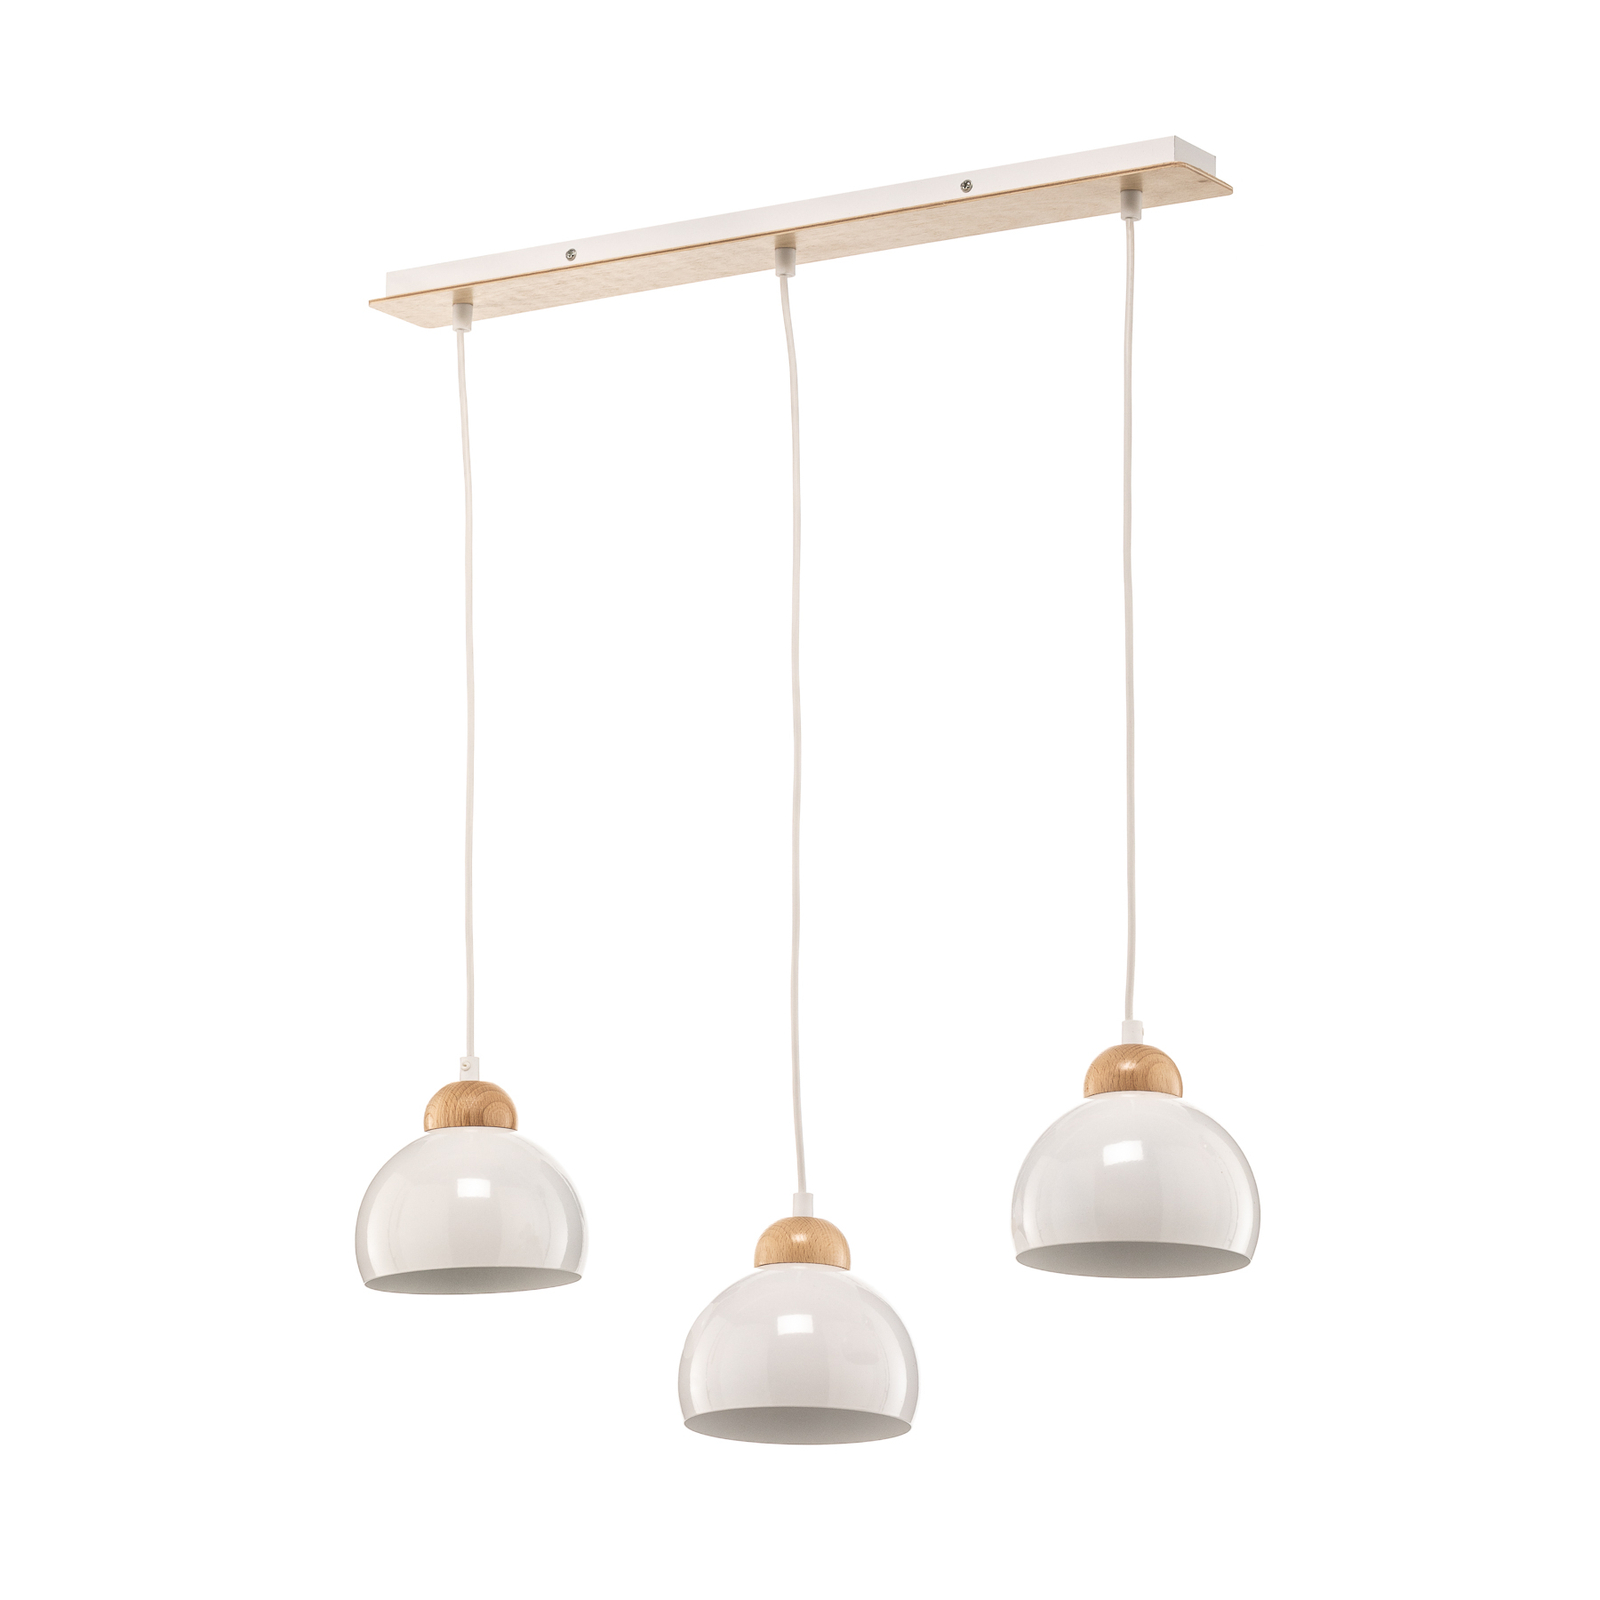 Hanglamp Dama, 3-lamps, wit/hout licht